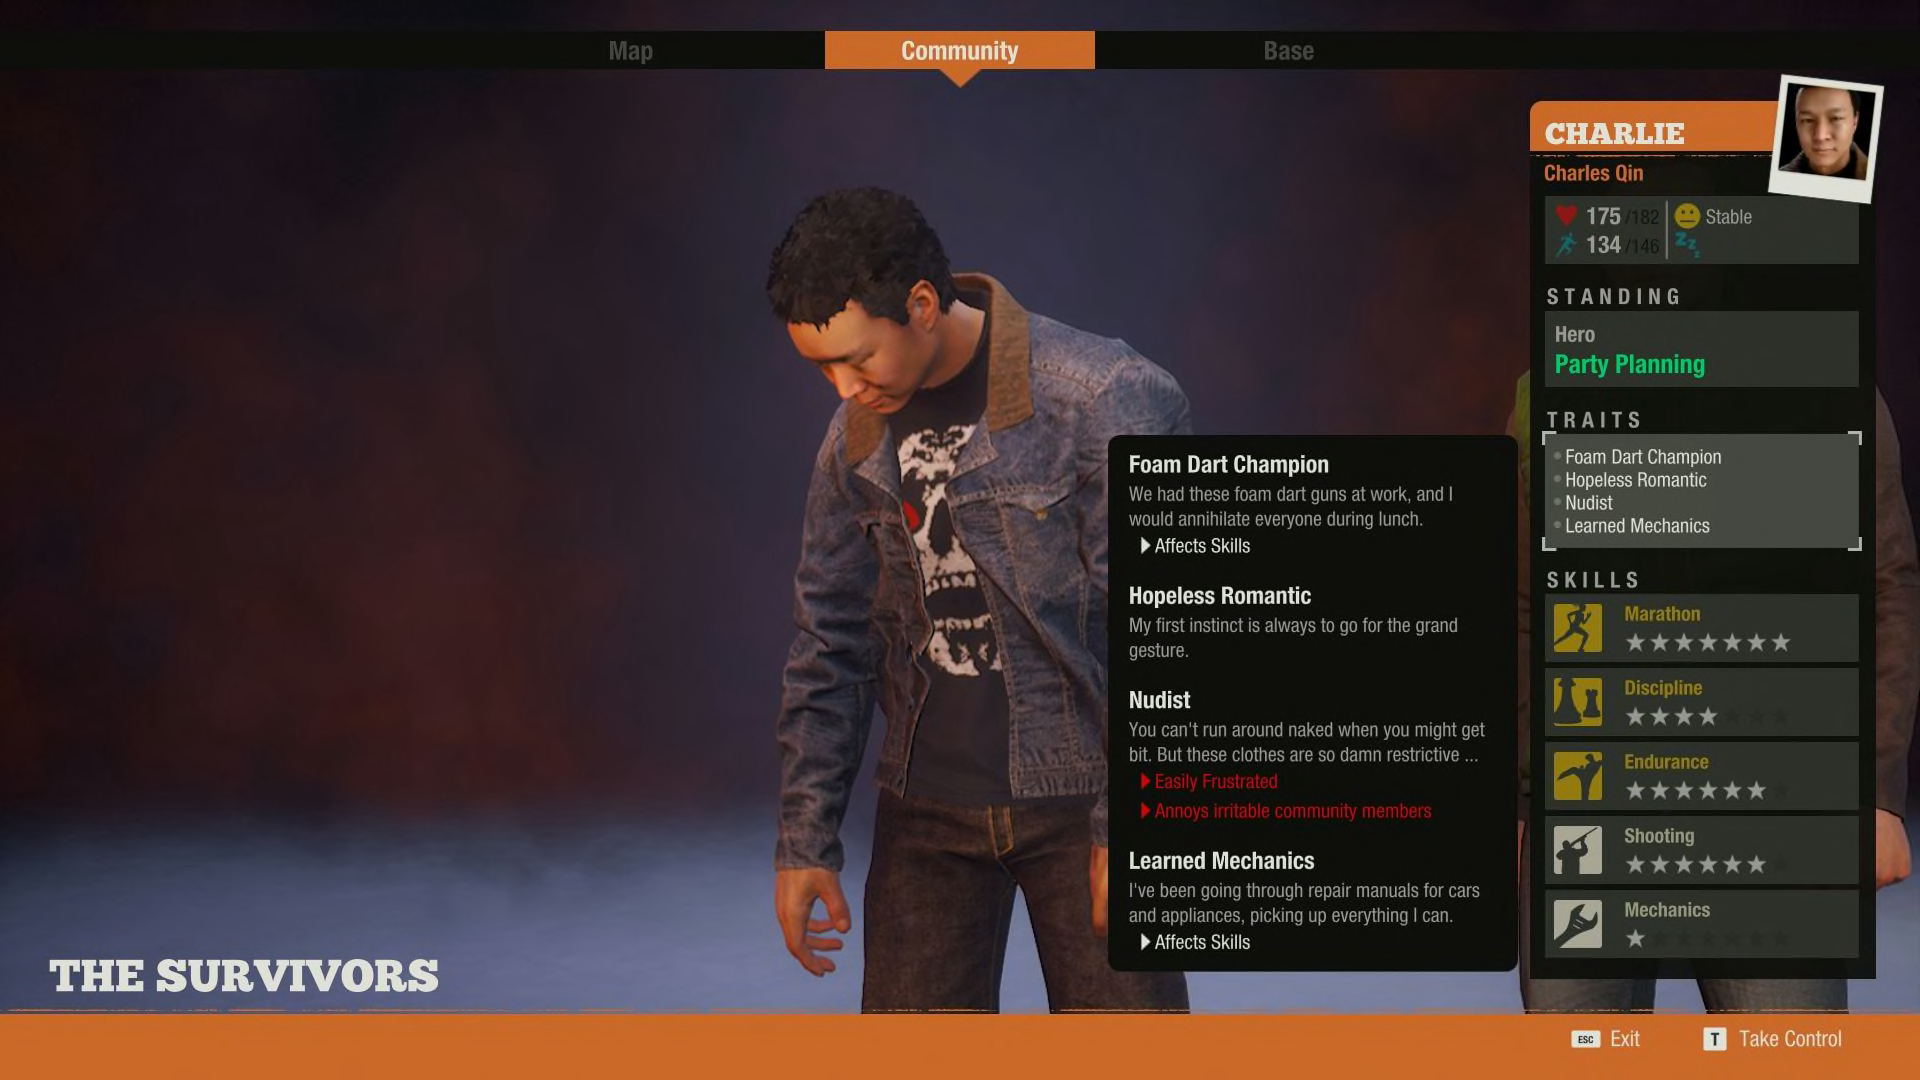 5 Things I Do That Makes State Of Decay 2 More Interesting (Challenging) :  r/StateOfDecay